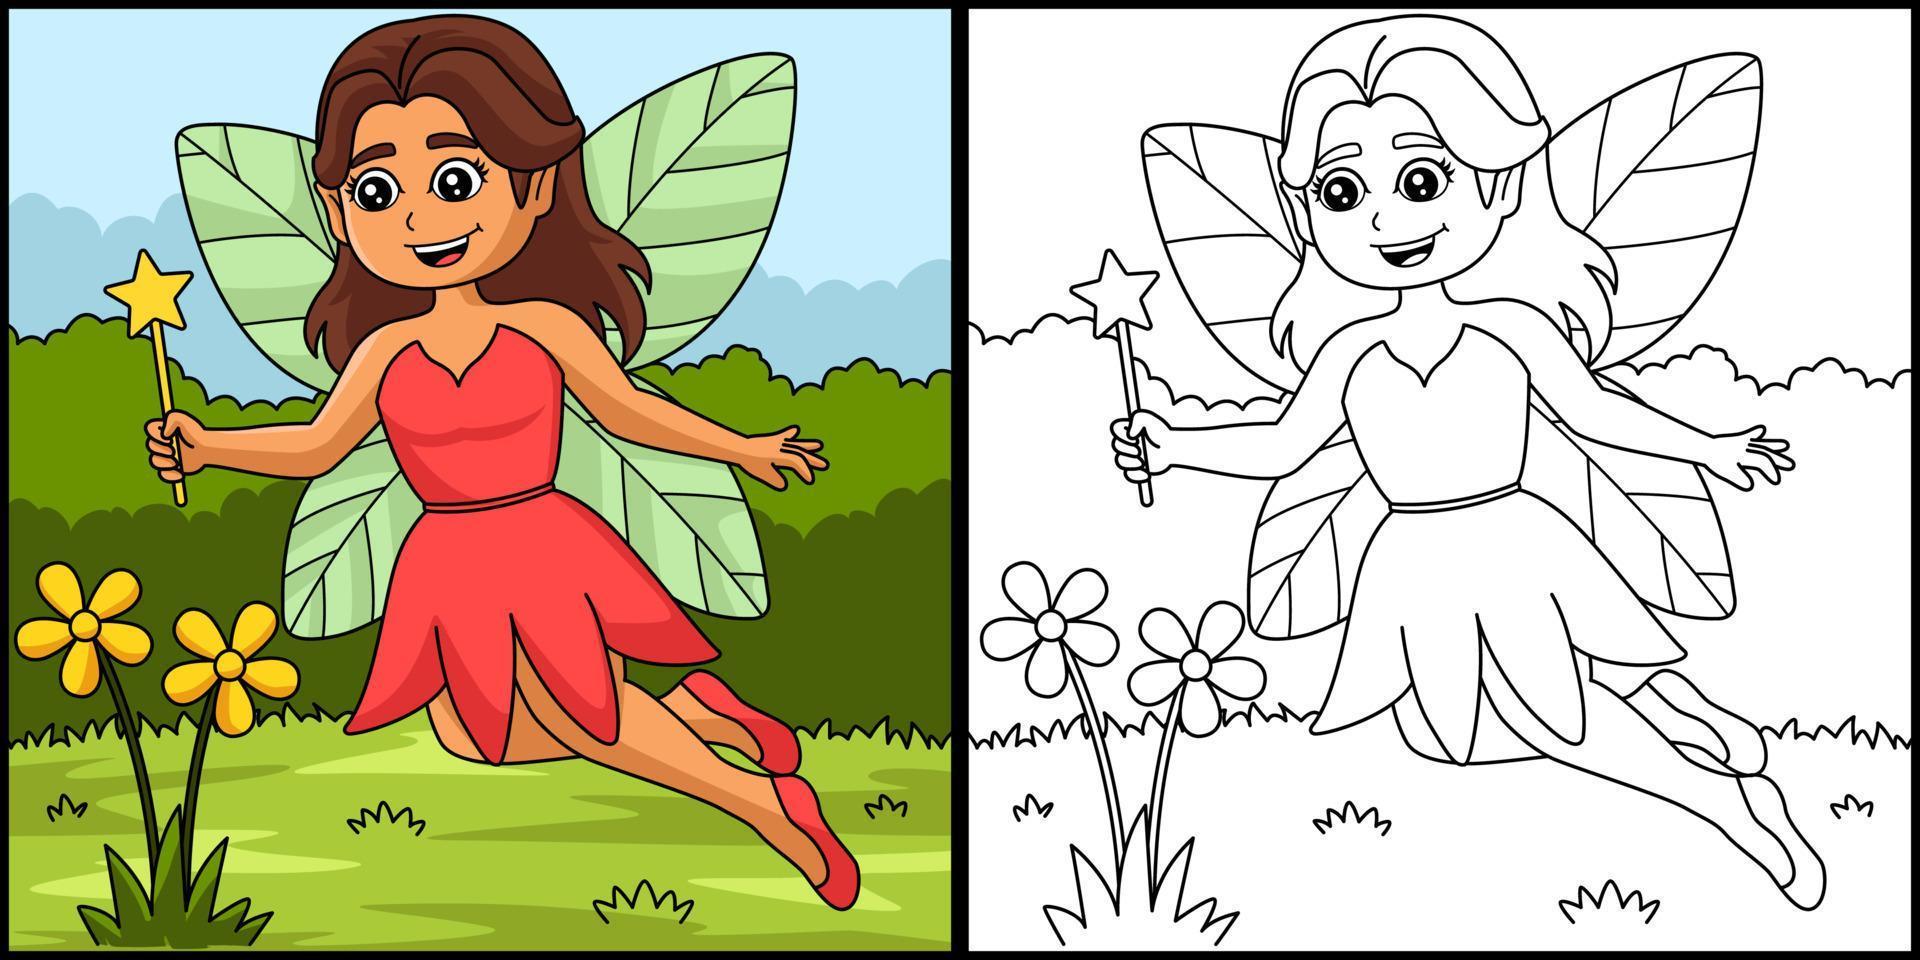 Fairy Holding Magic Wand Coloring Illustration vector